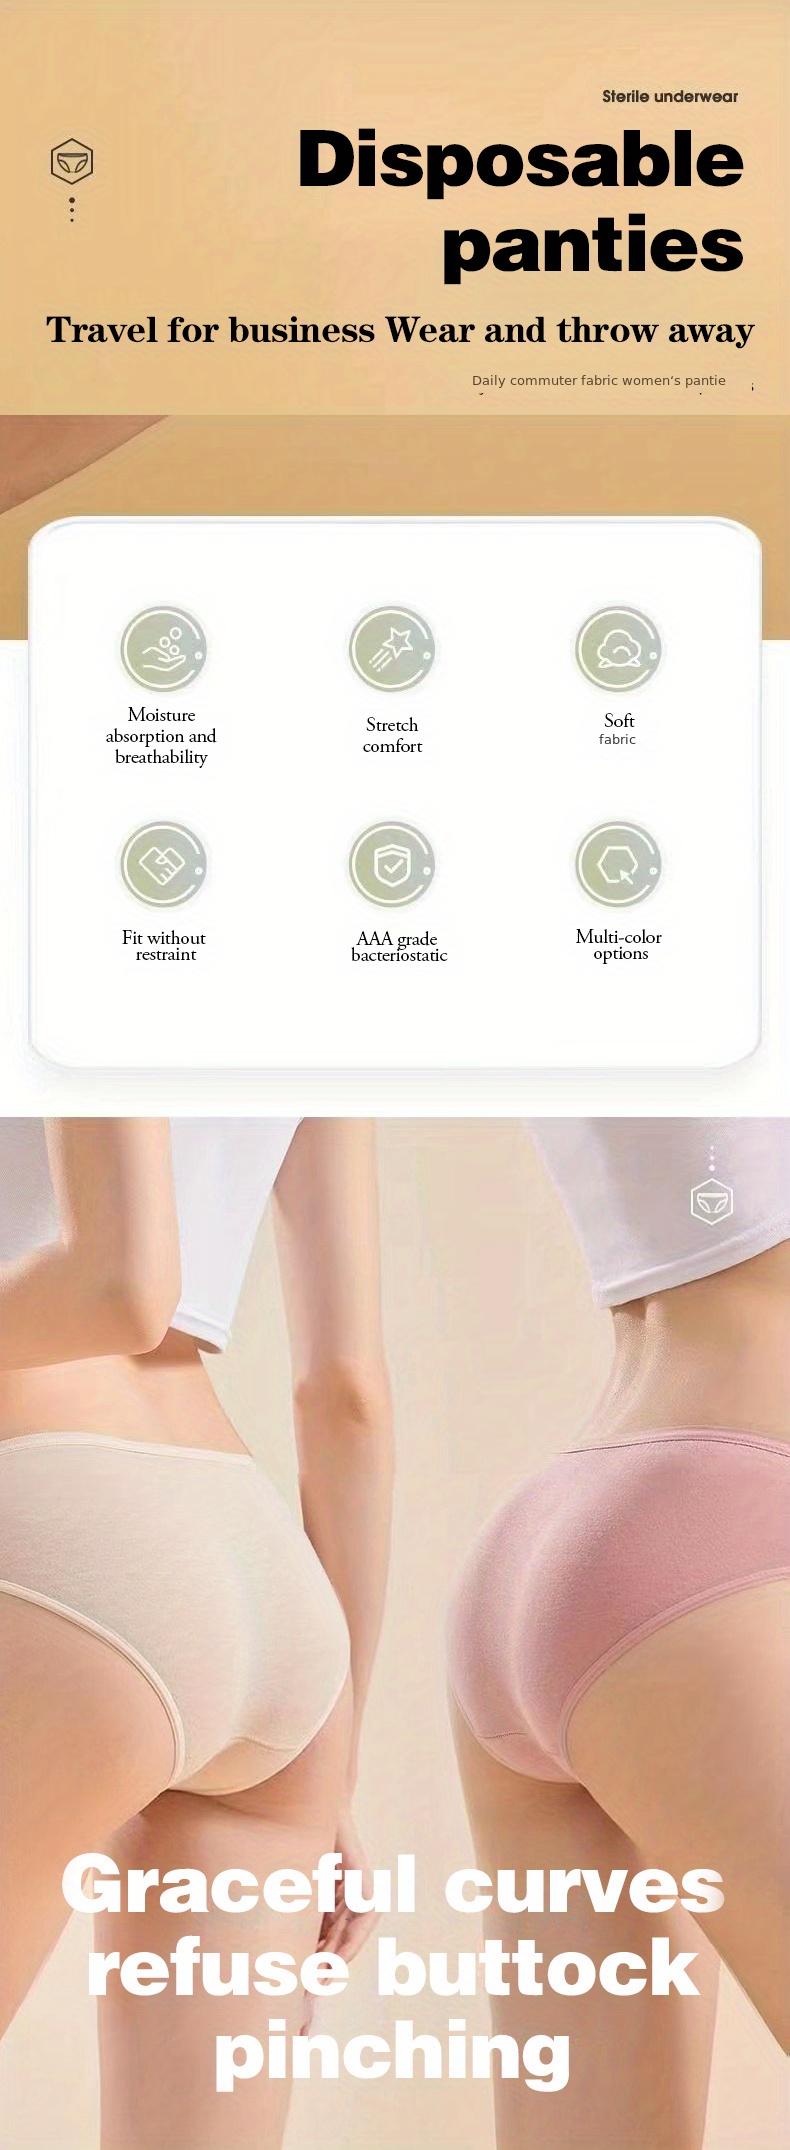 XEMIT Panties for Woman - Cotton Printed Flower Design Disposable Underwear  Postpartum Care & Non-Woven Plenty Comfortable for Travelling, Spa